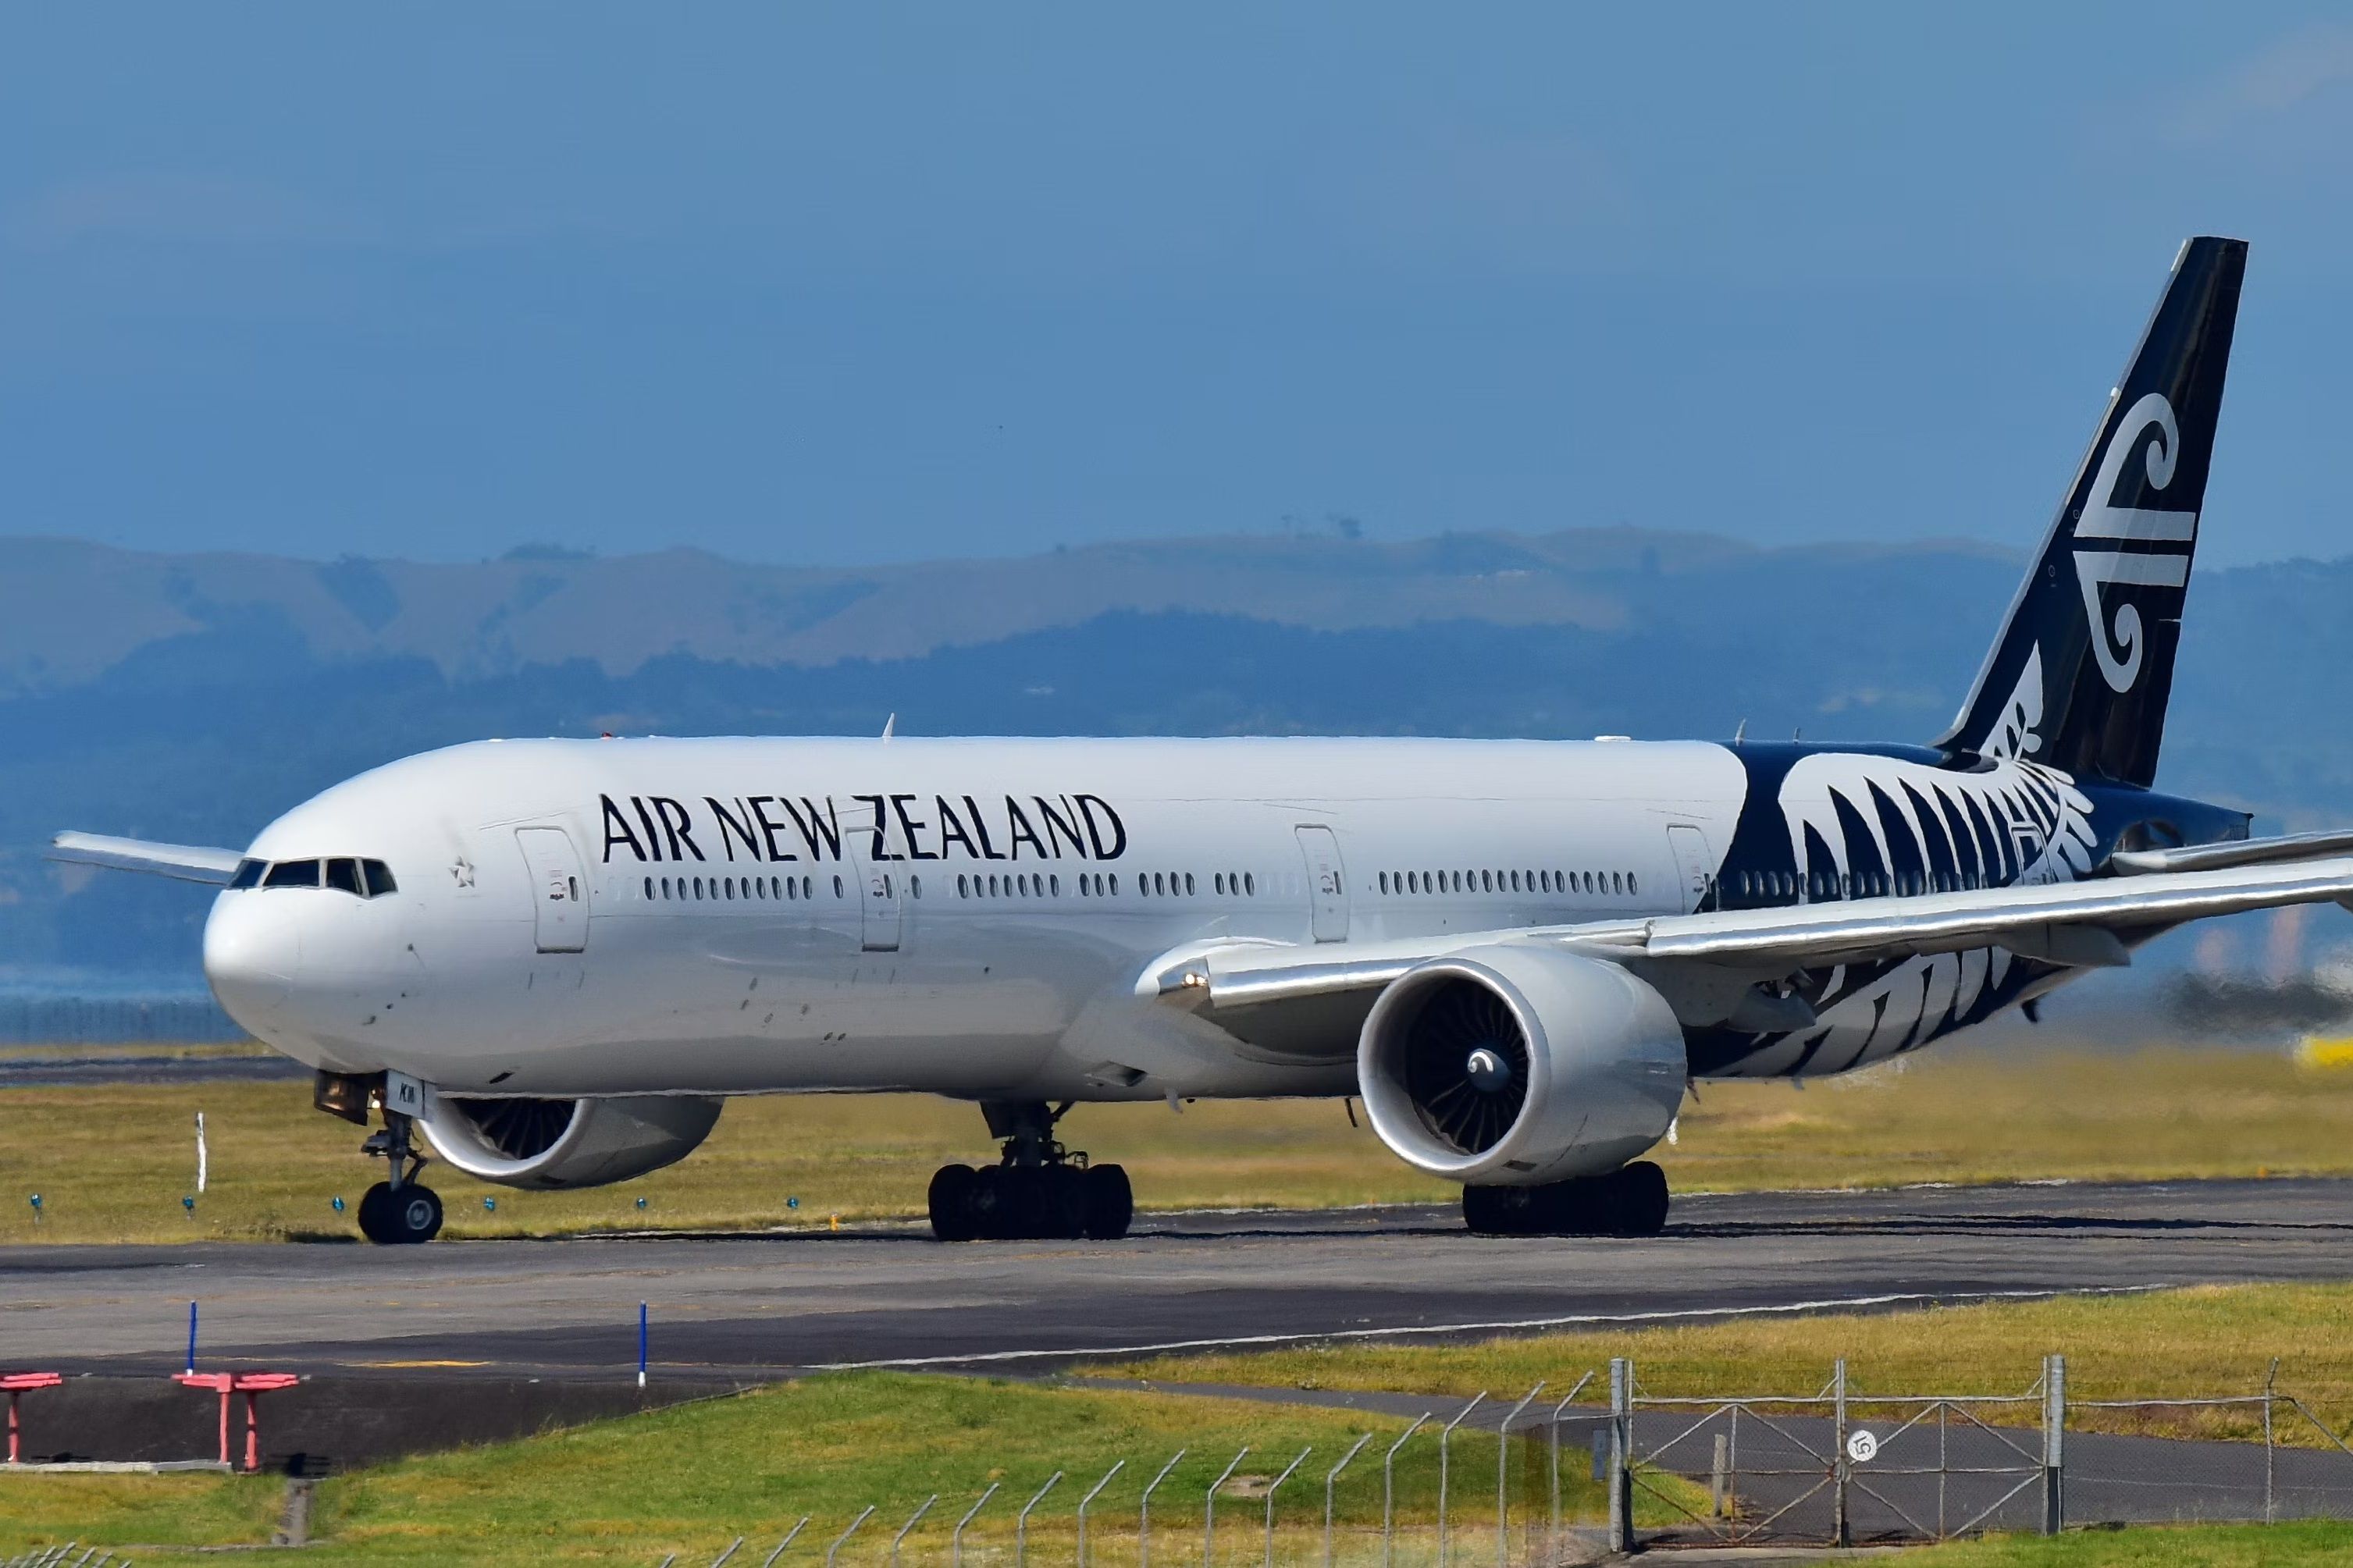 An Air New Zealand Boeing 777-300ER taxiing at Auckland International Airport.